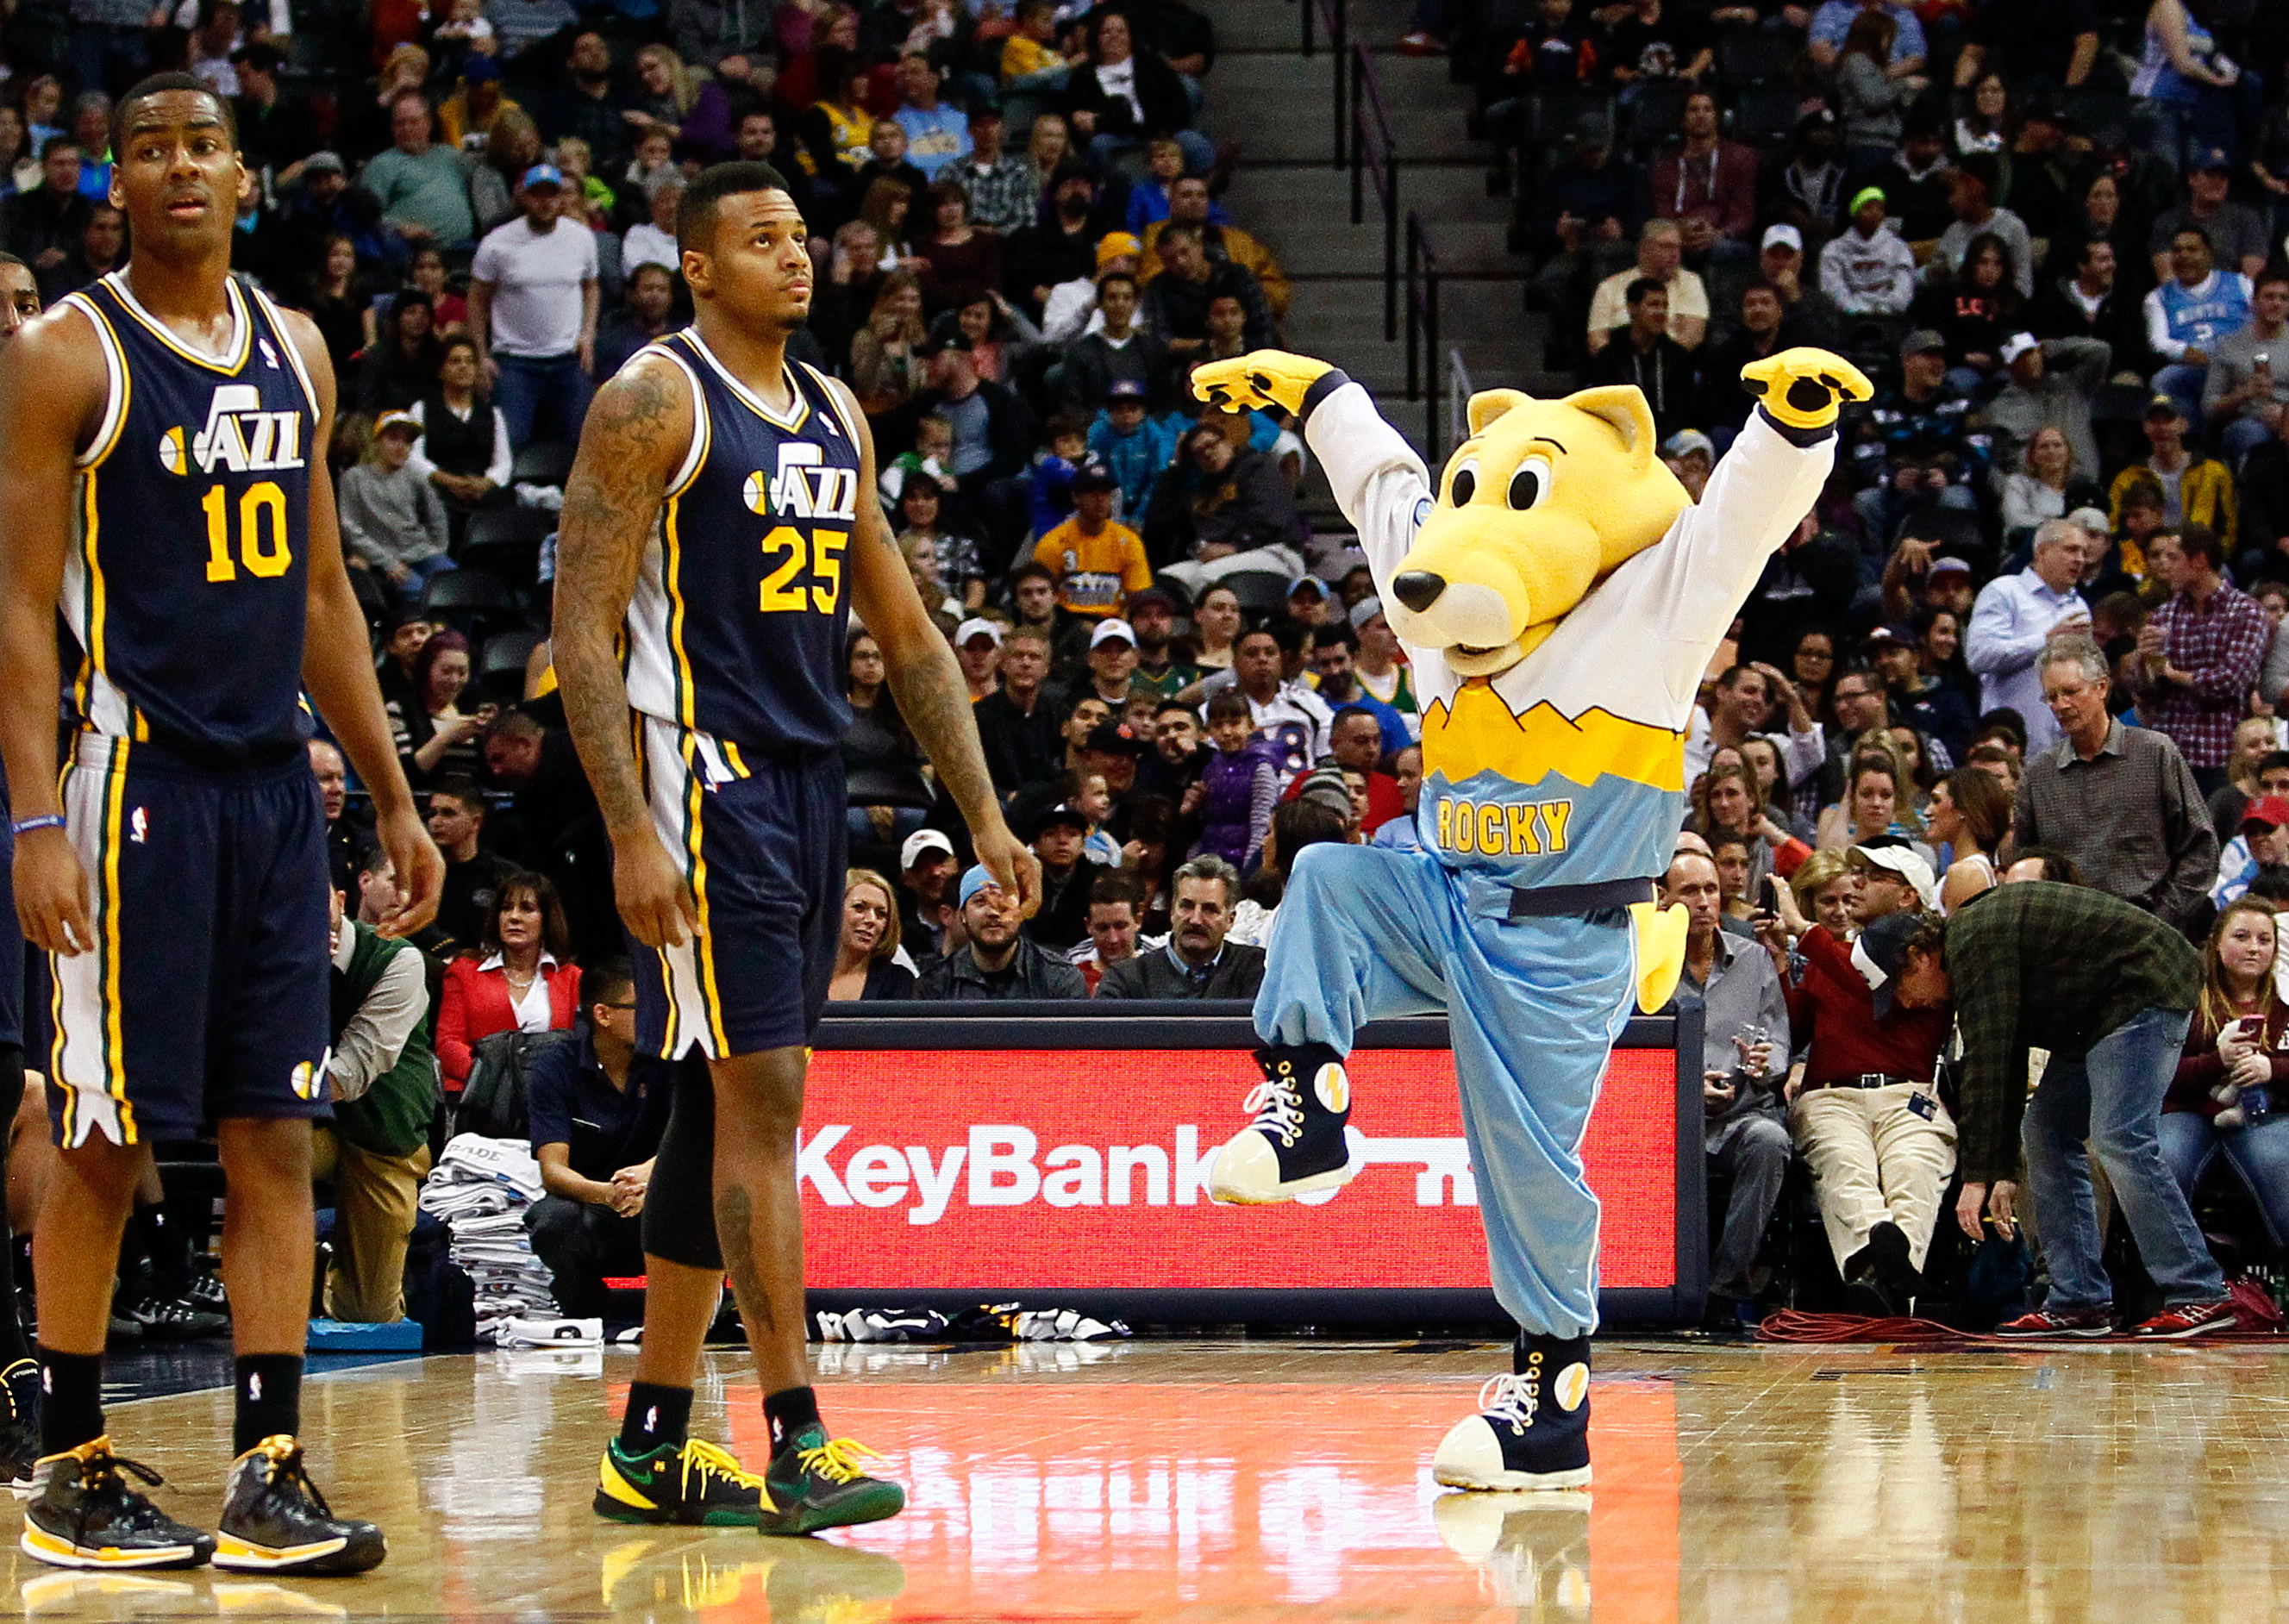 Denver Nuggets: Rocky is the Best Mascot